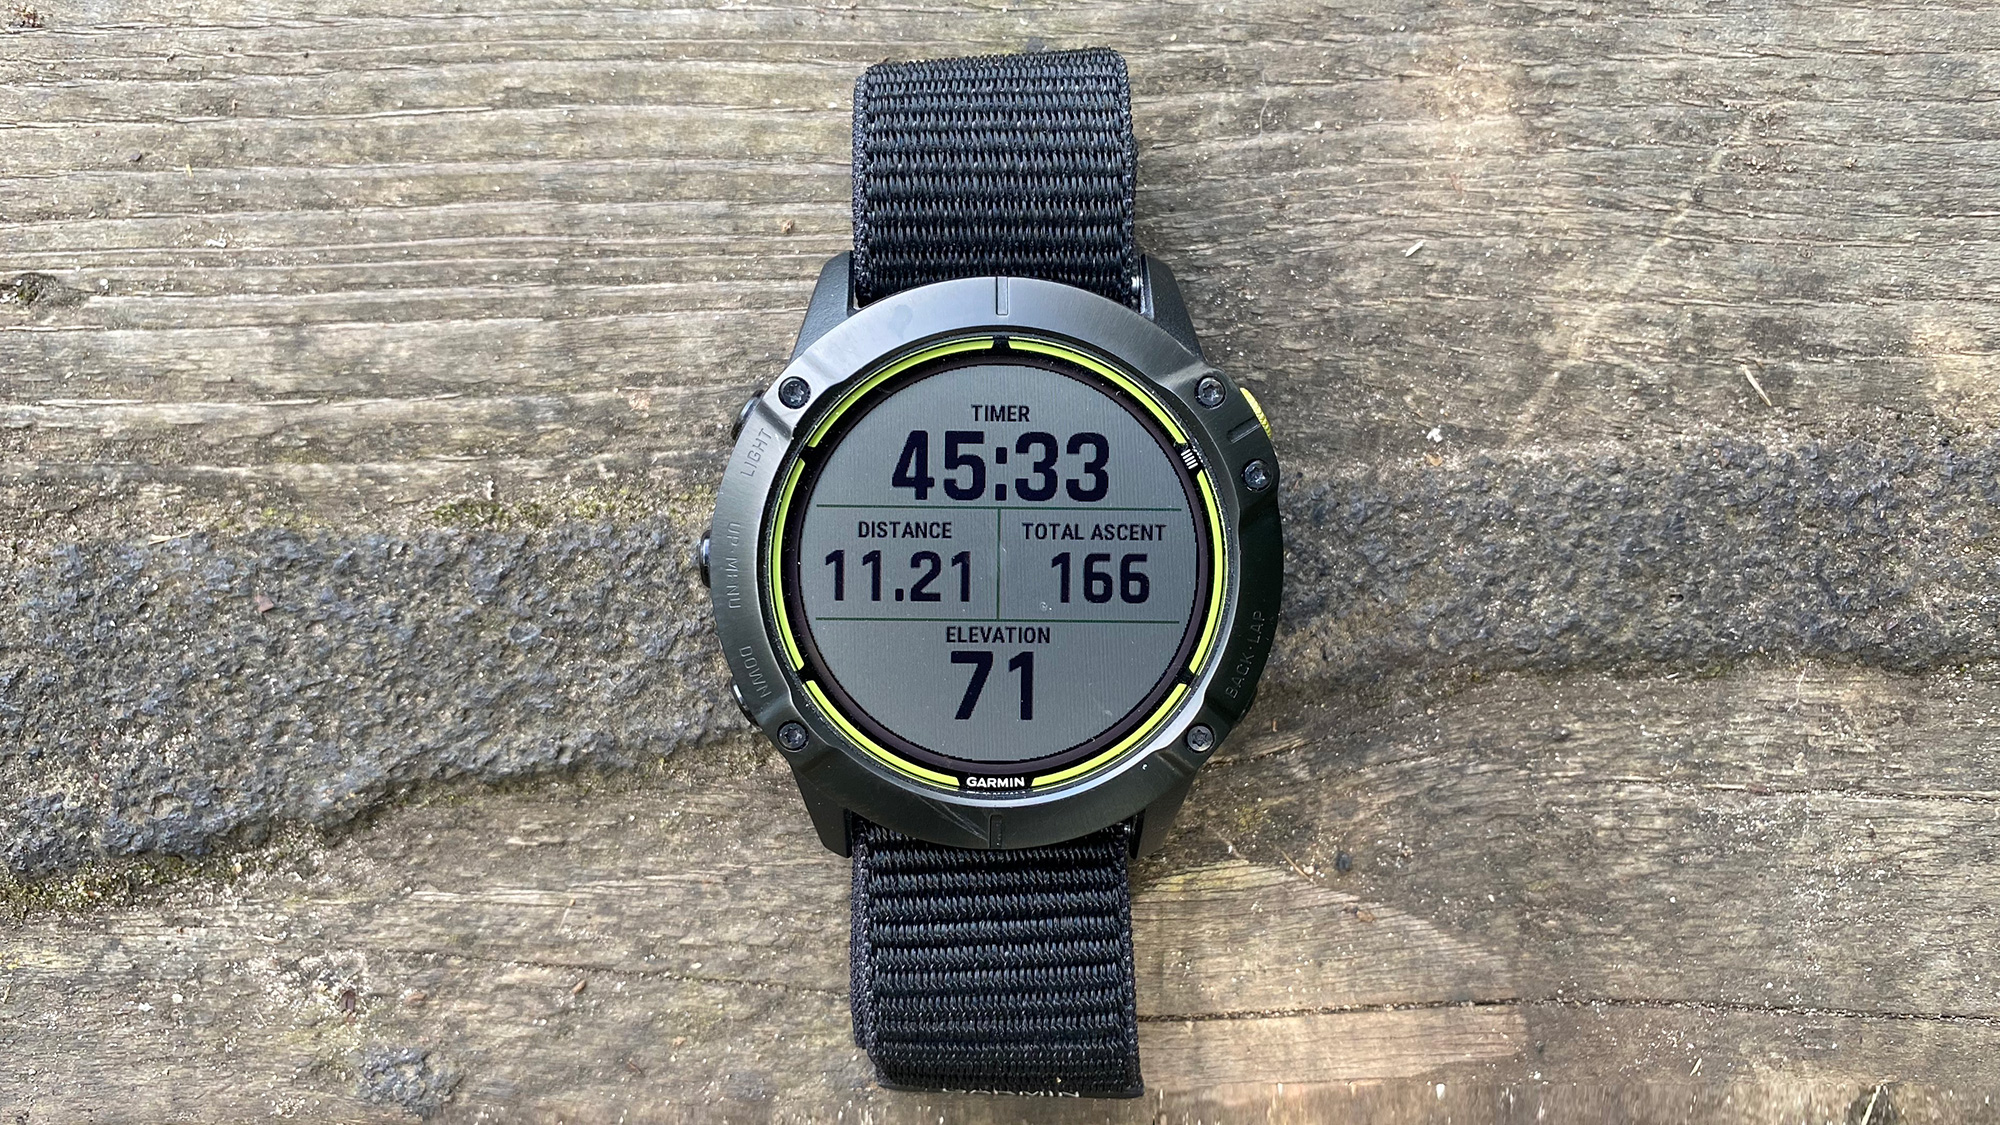 The Garmin Enduro running watch pictured on a slab of wood